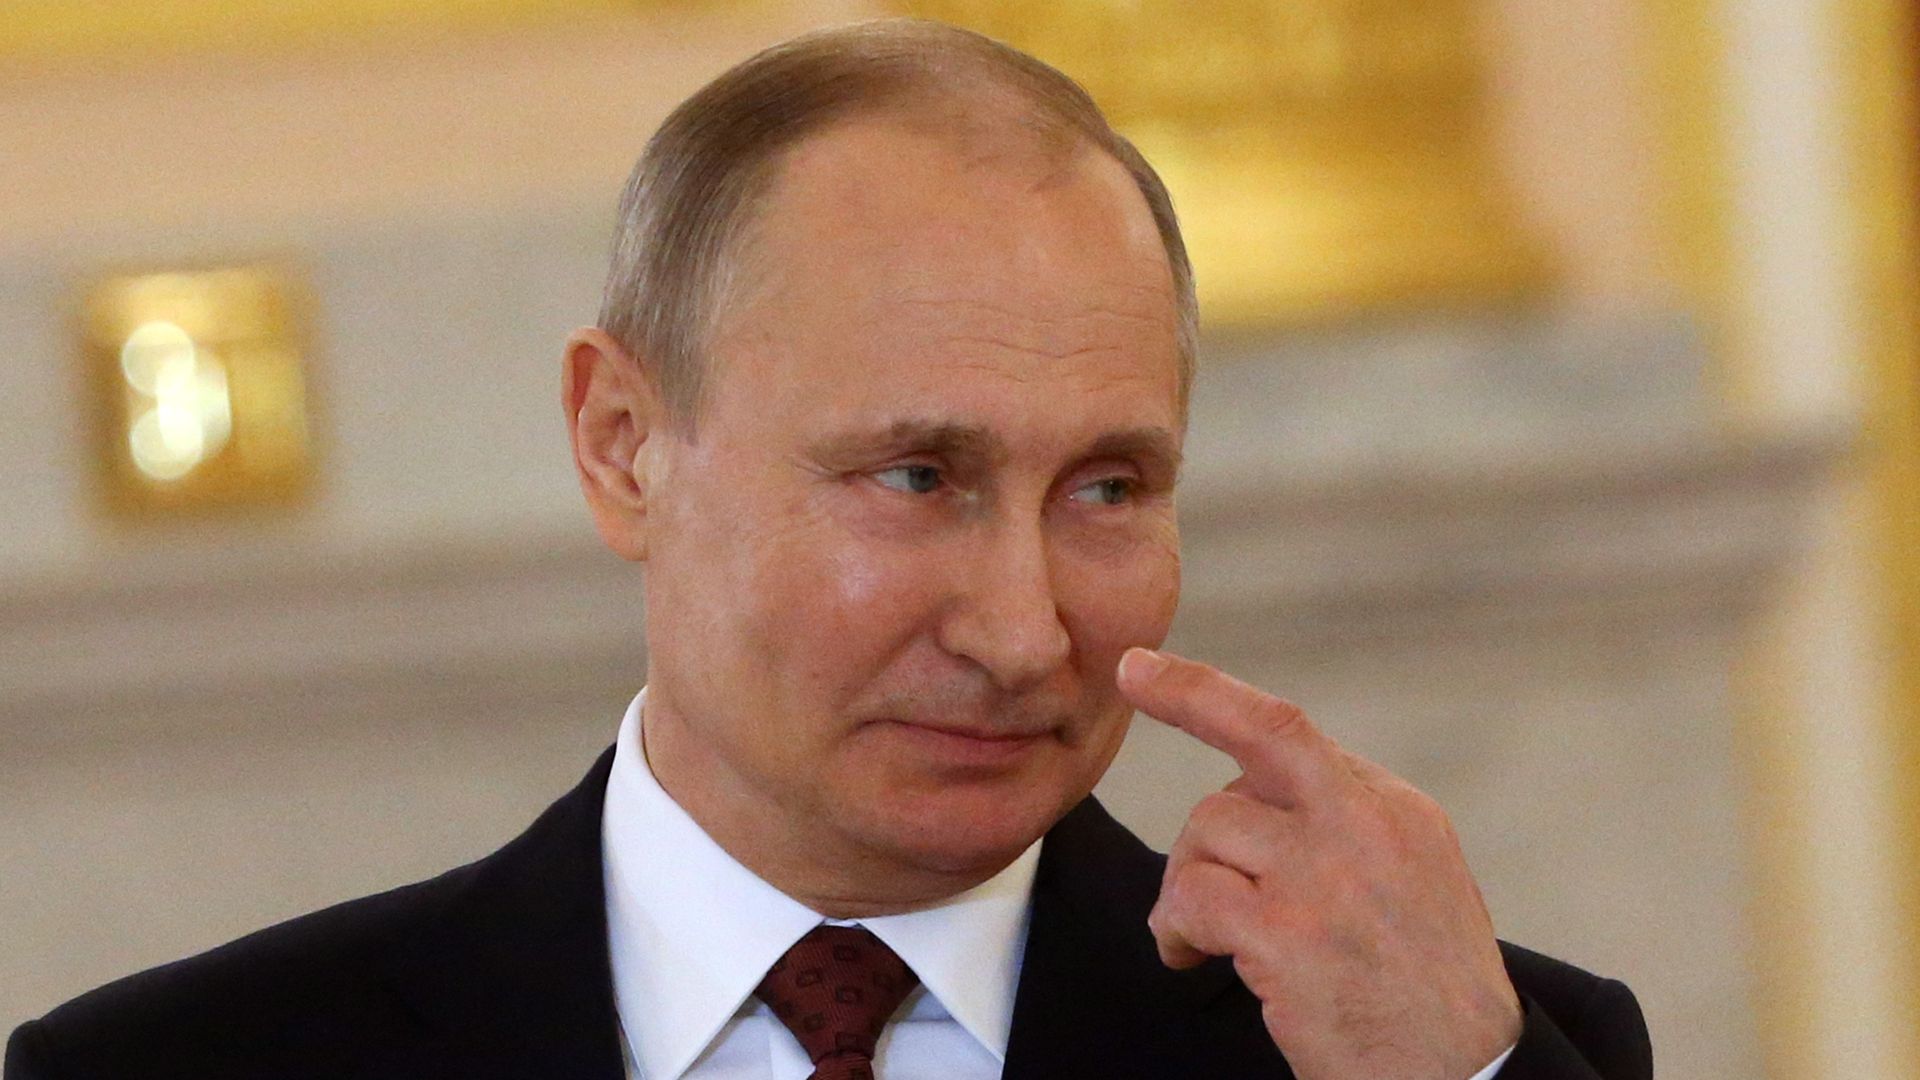 Vladimir Putin in a suit smiles to someone in the distance and looks sideways out of his eyes and points to himself, before a gold background.